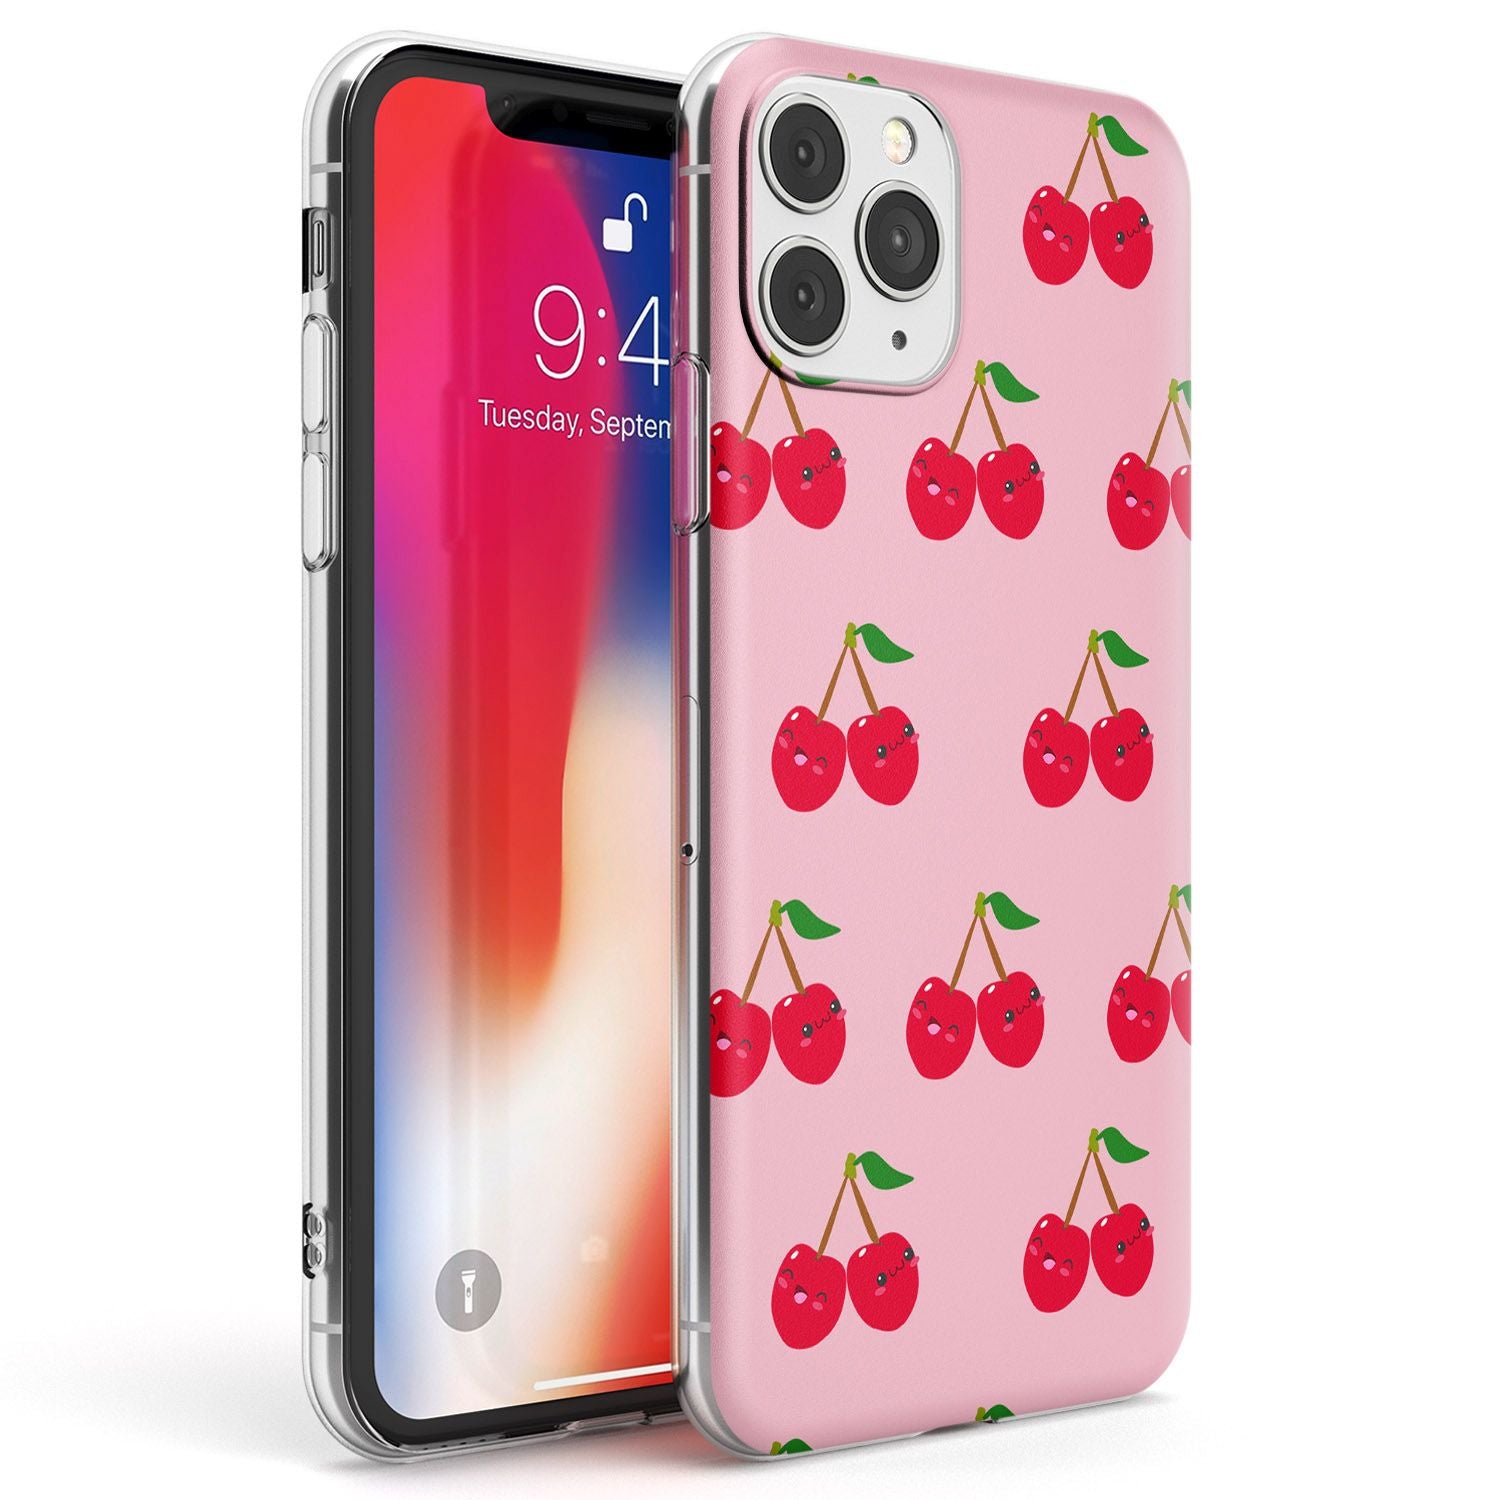 Cheeky Cherry Phone Case iPhone 11 Pro Max / Clear Case,iPhone 11 Pro / Clear Case,iPhone 12 Pro Max / Clear Case,iPhone 12 Pro / Clear Case Blanc Space